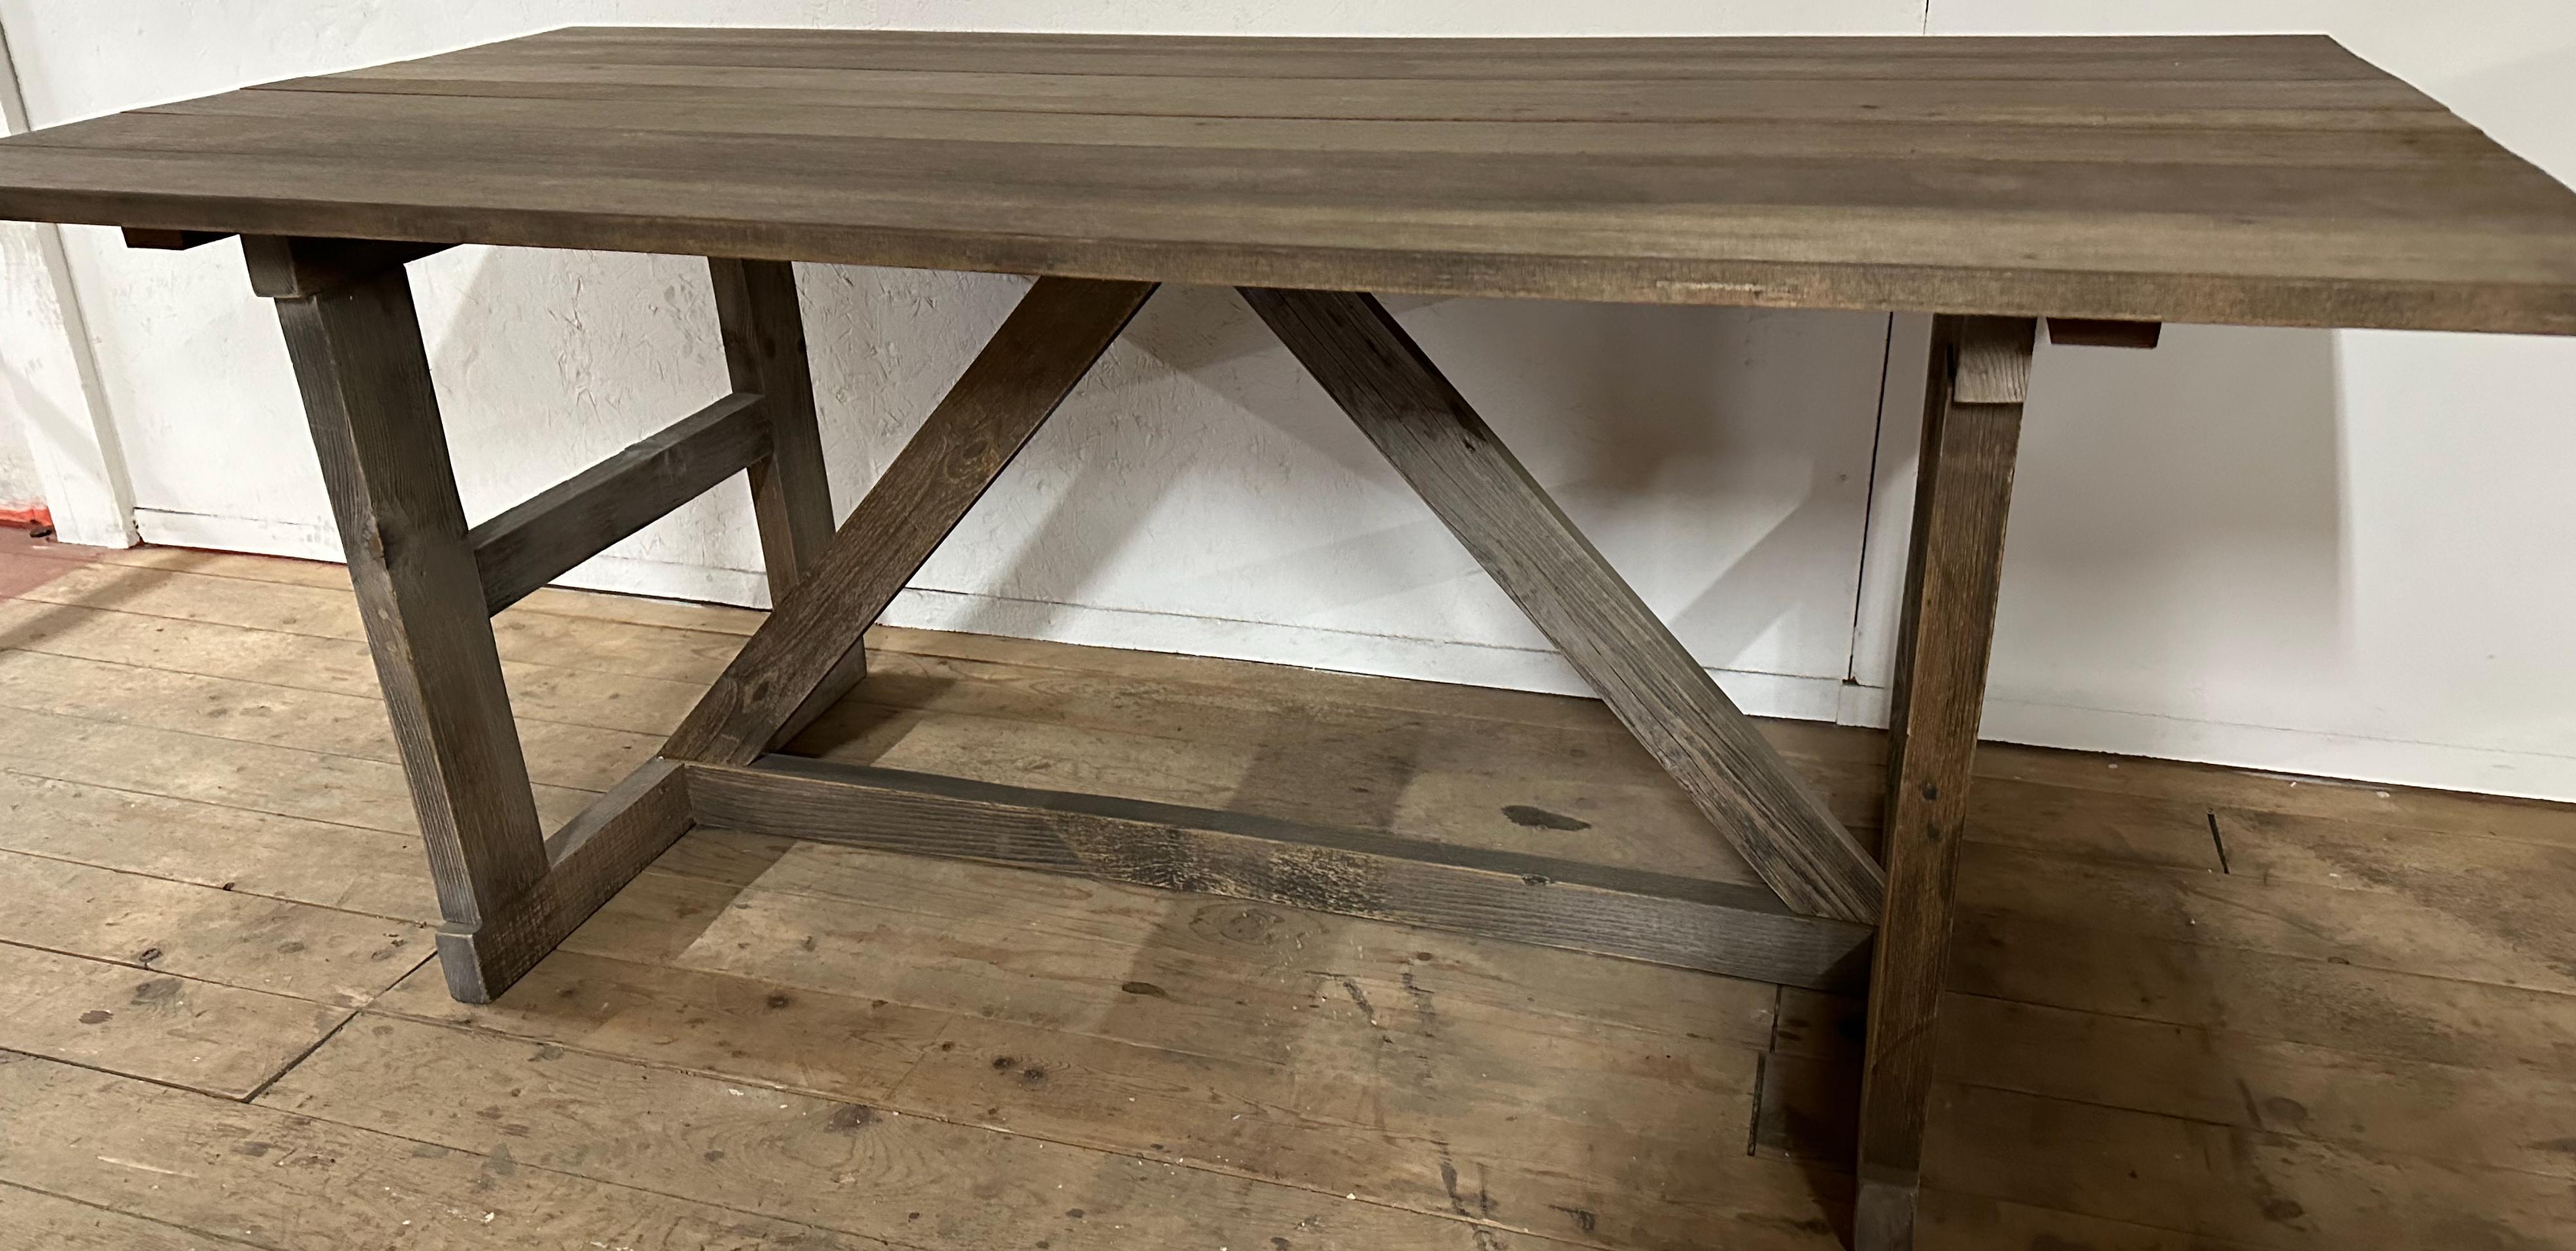 Rustic Vintage Farm or Work Table For Sale 2